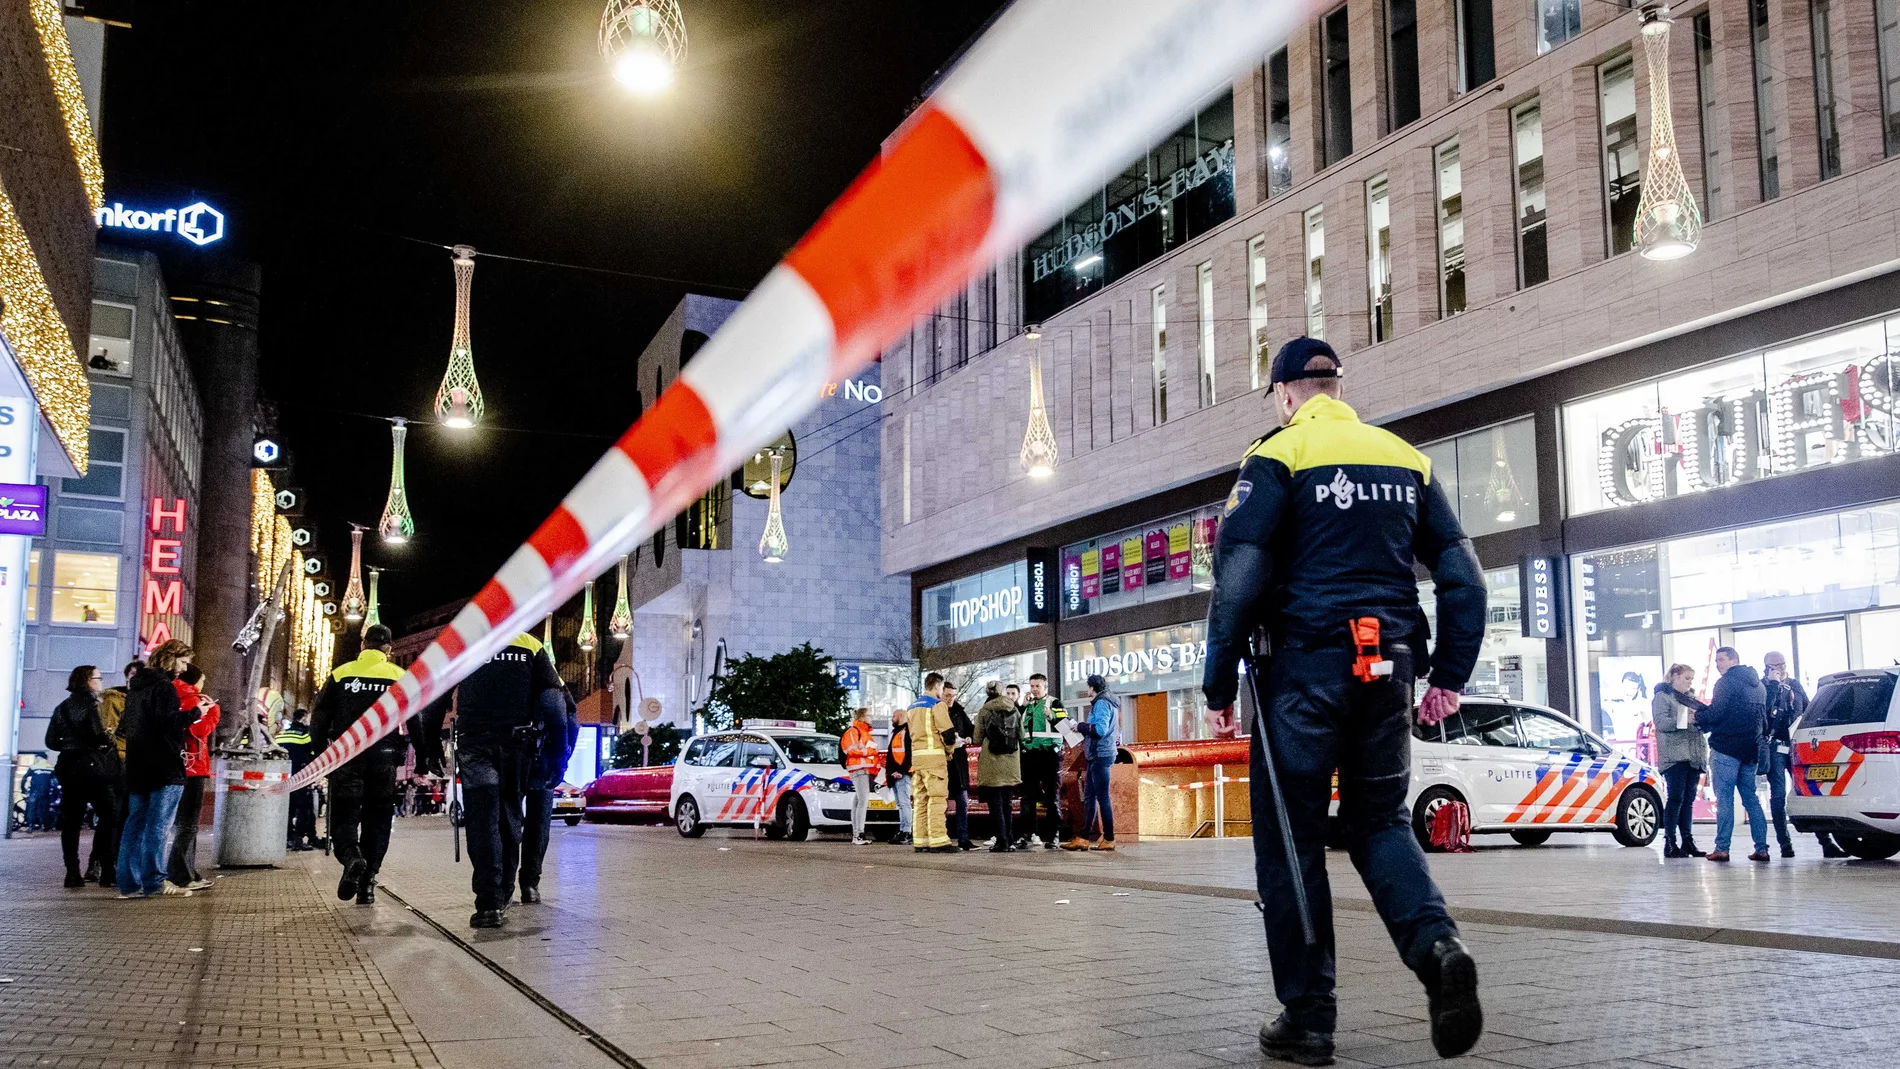 Three injured in a stabbing in The Hague